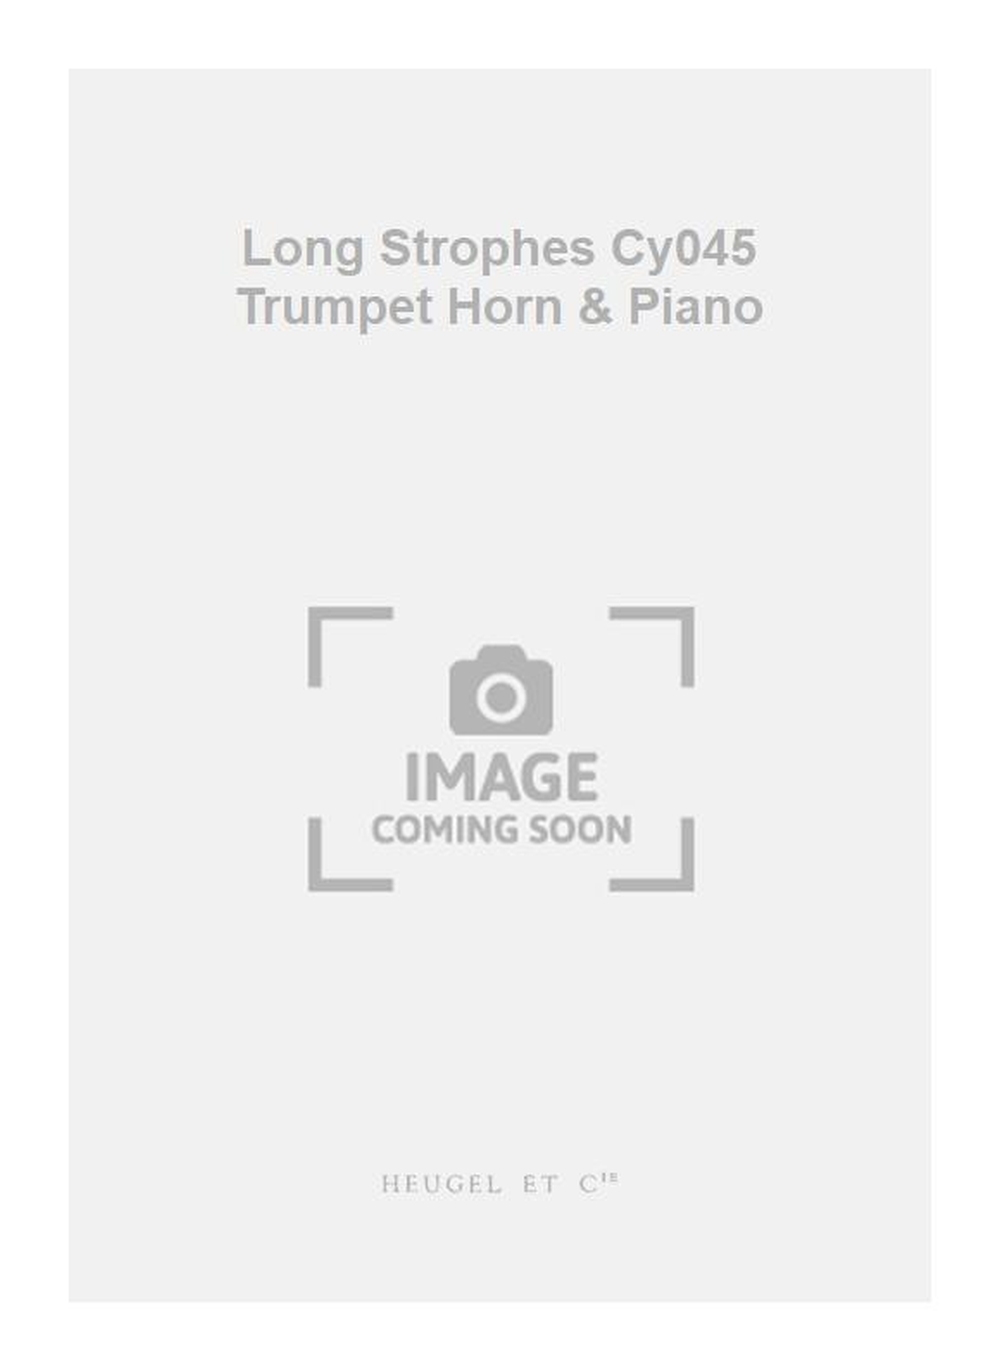 Richard Long: Long Strophes Cy045 Trumpet Horn & Piano